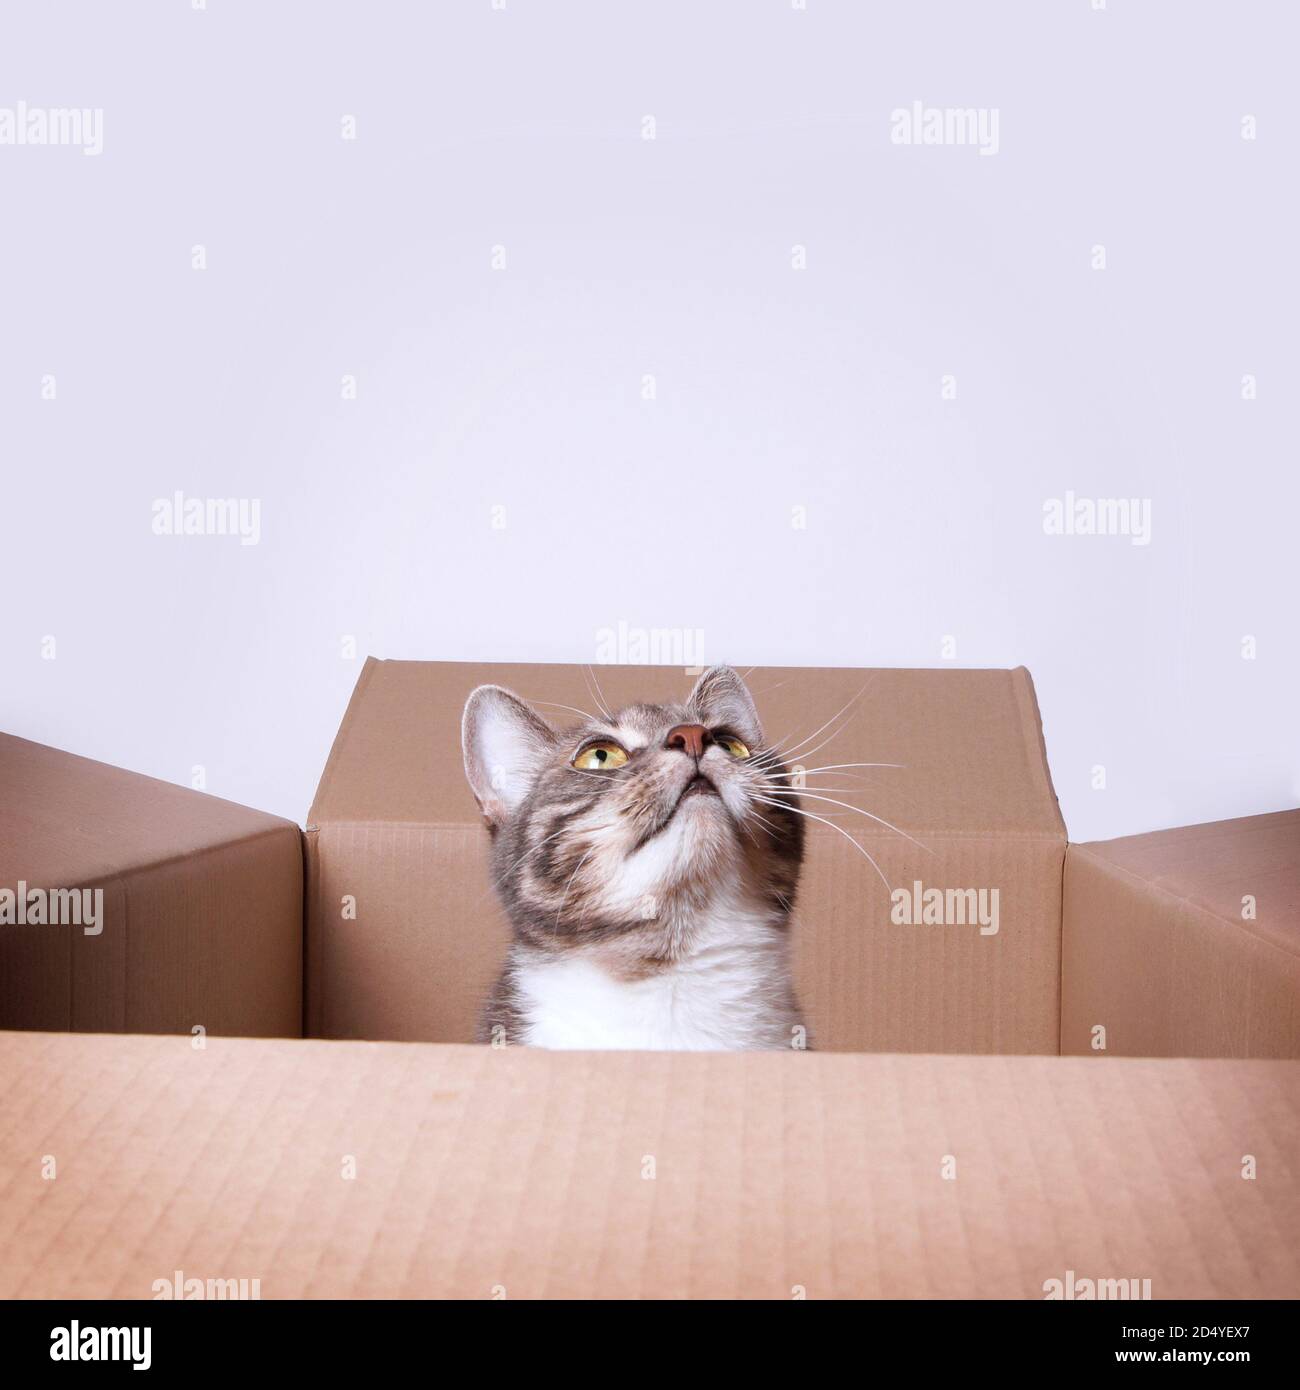 Curious cat in a cardboard box or carton looking up to copy space Stock Photo